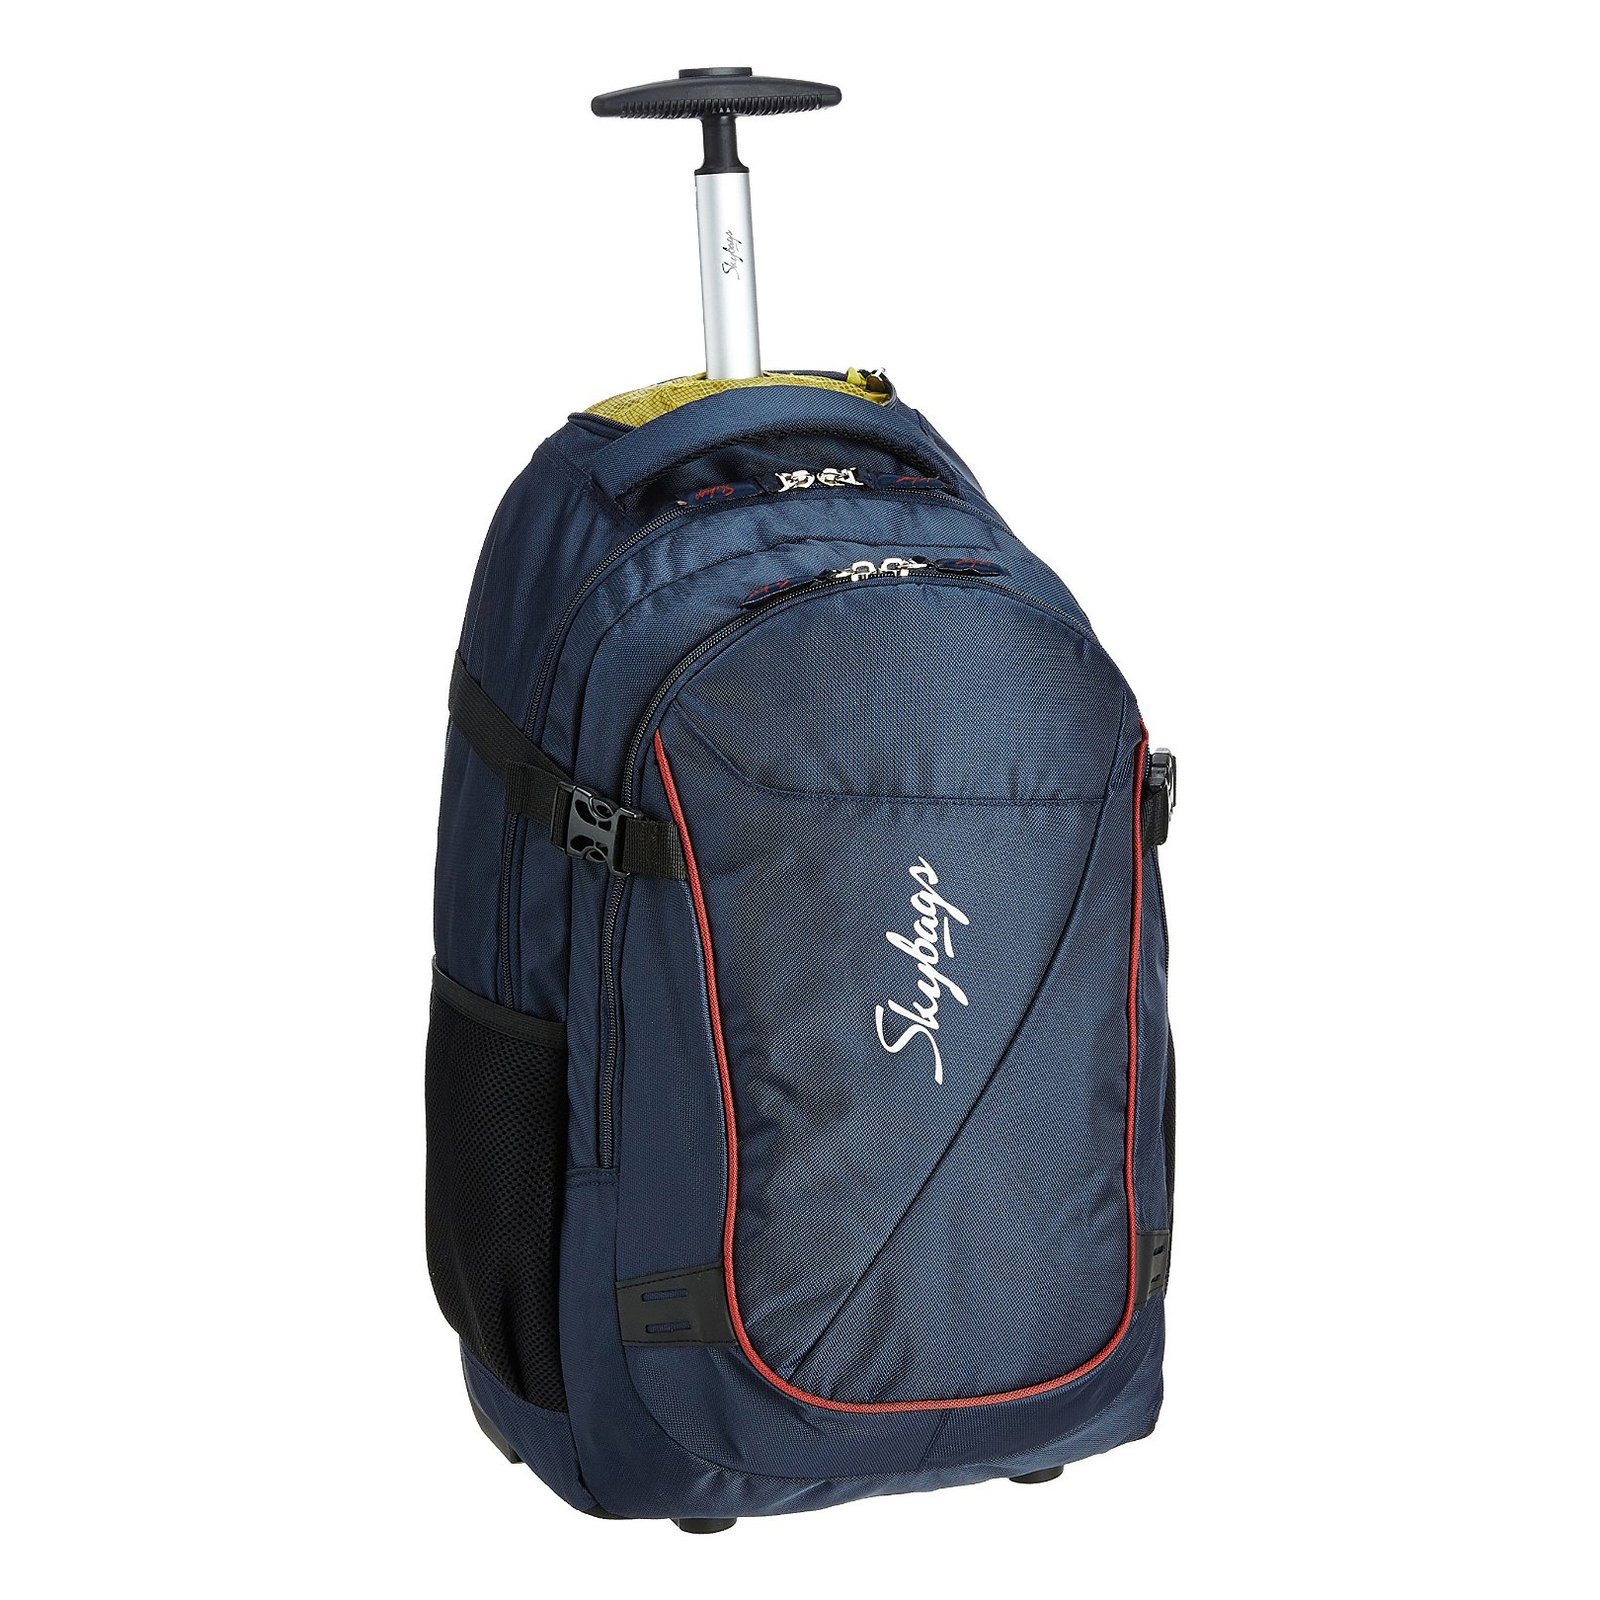 Sky Backpack Bag | Rave and Festival clothing on Wild Thing